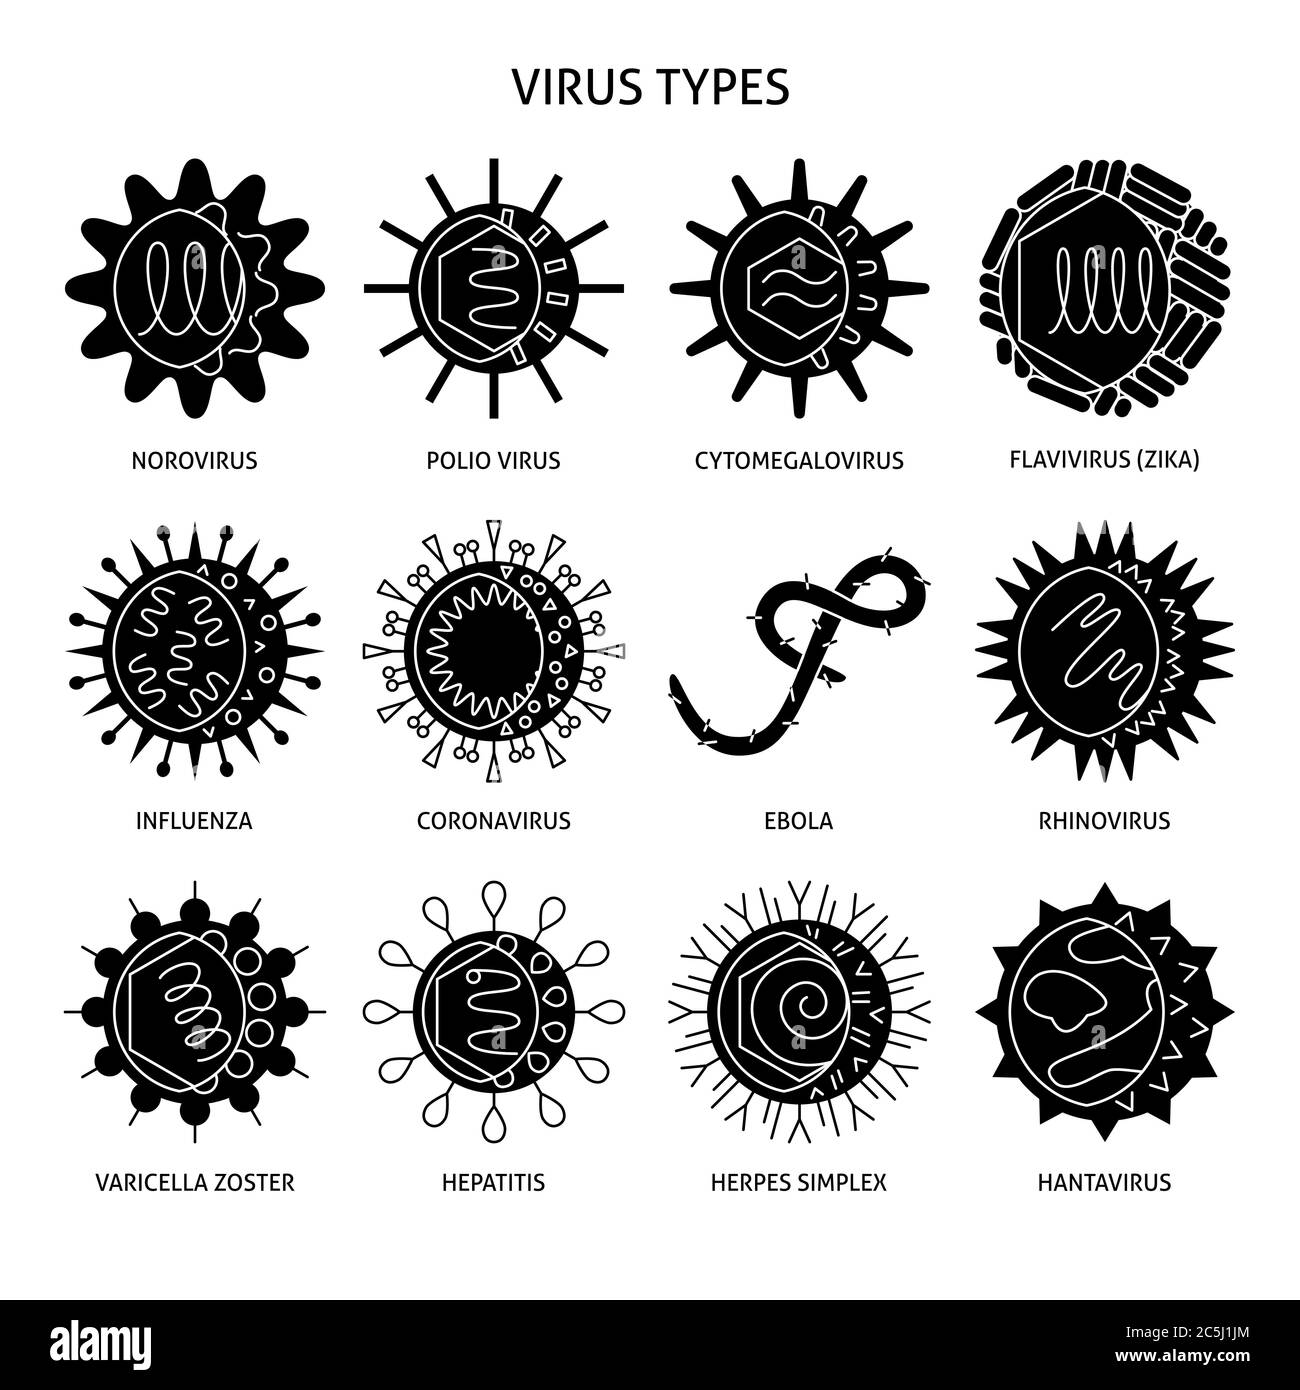 Human virus types silhouette icon set. Infection microorganism symbols collection. Vector illustration. Stock Vector